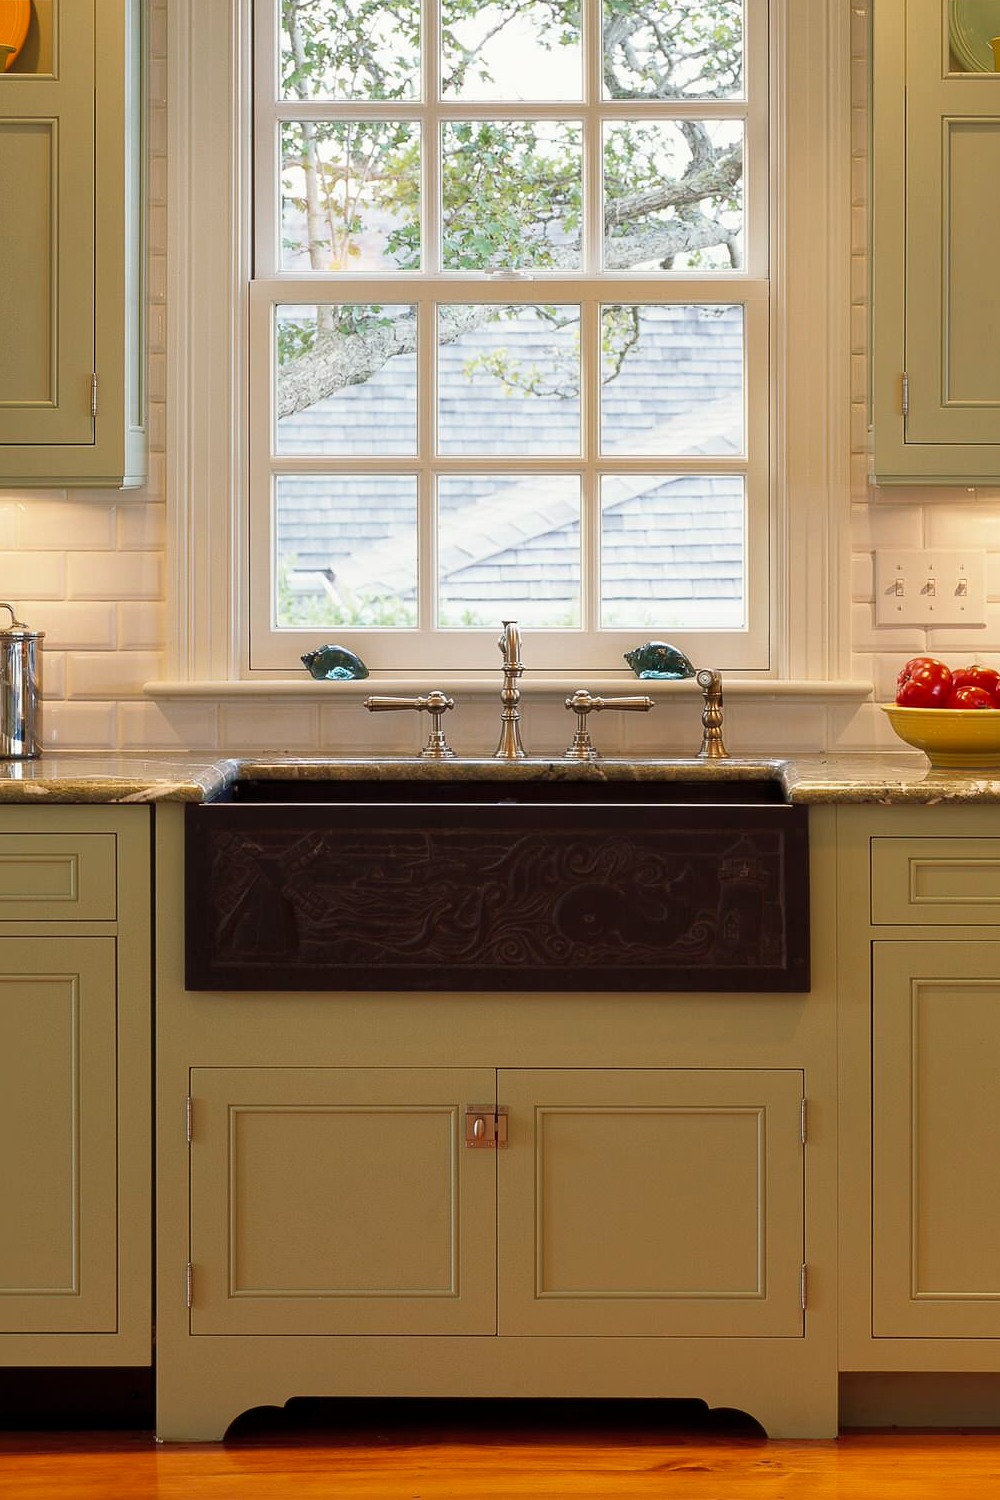 Painted Cabinets Paint Color Lower Cabinets Painted Kitchen Add Contrast Space Room Dark